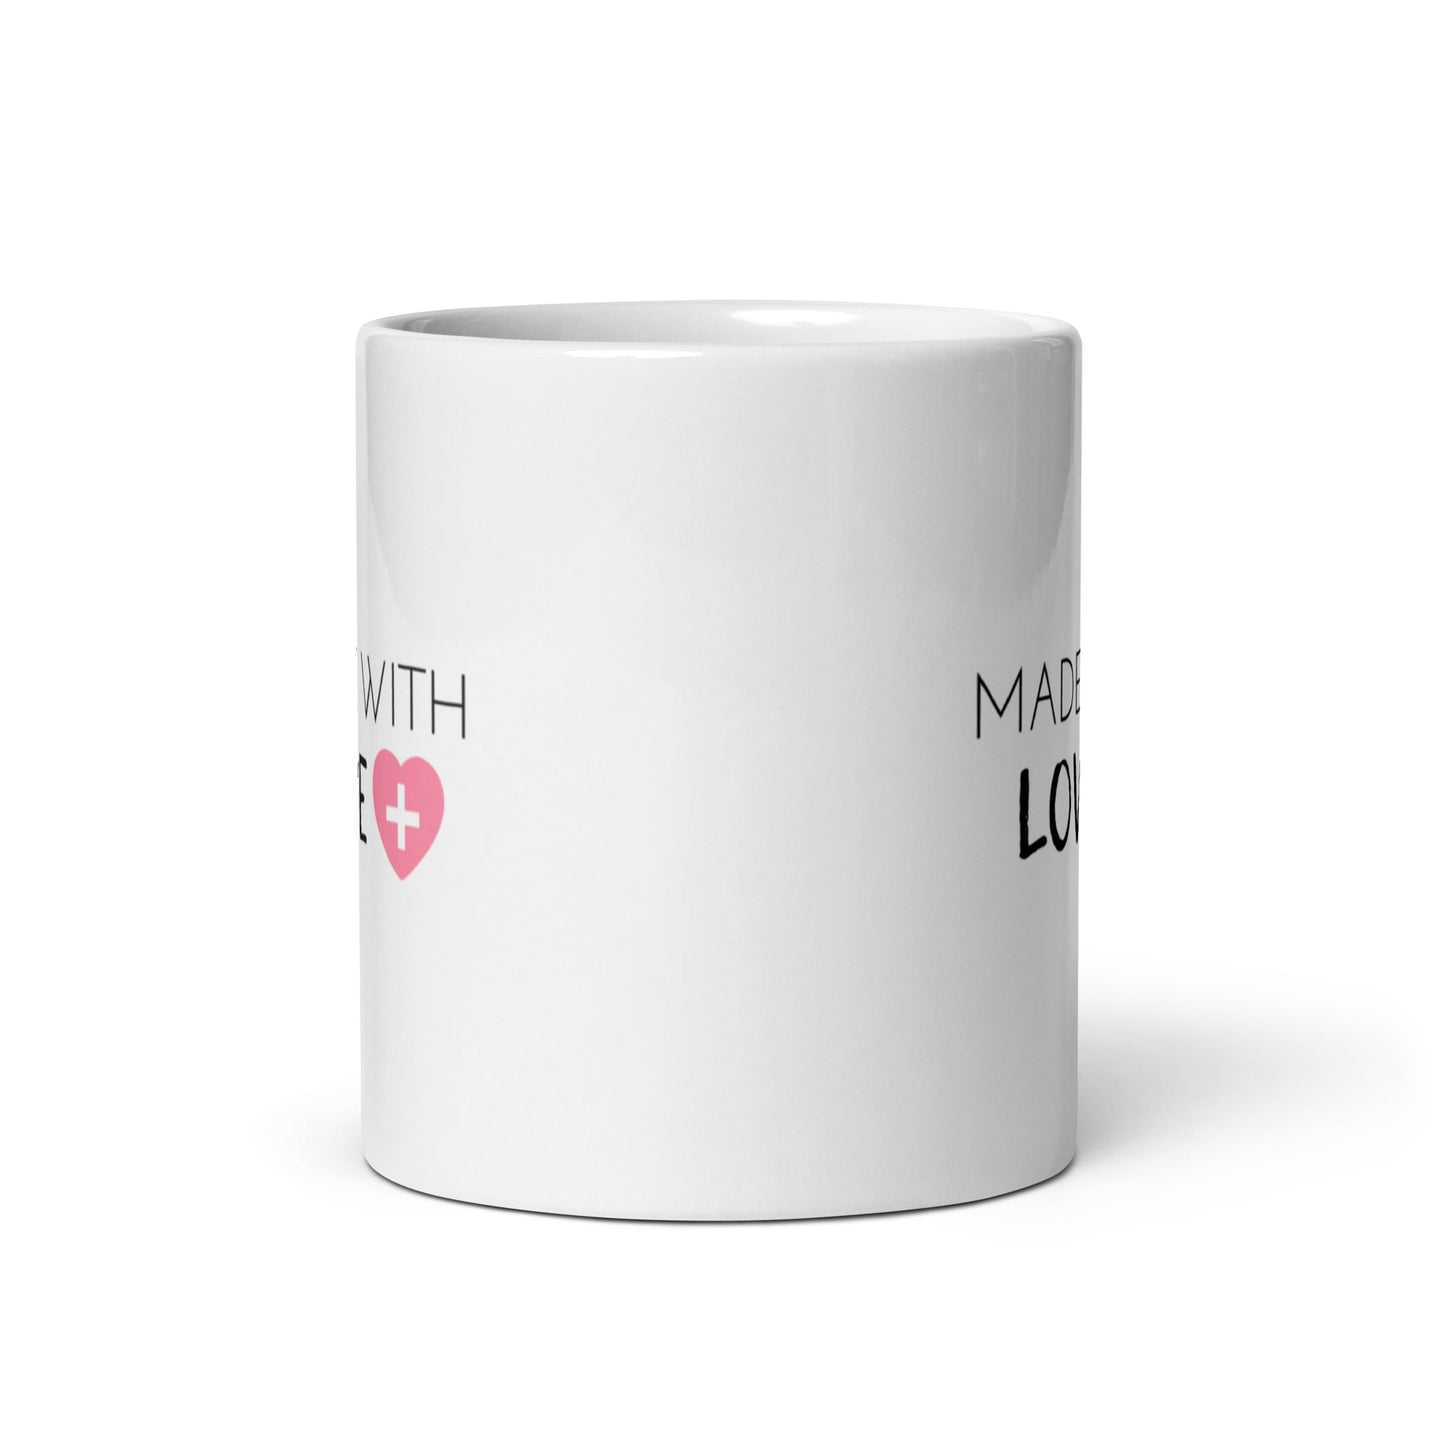 Christian Mugs: Sip Faith with Every Morning | Christian Accessories